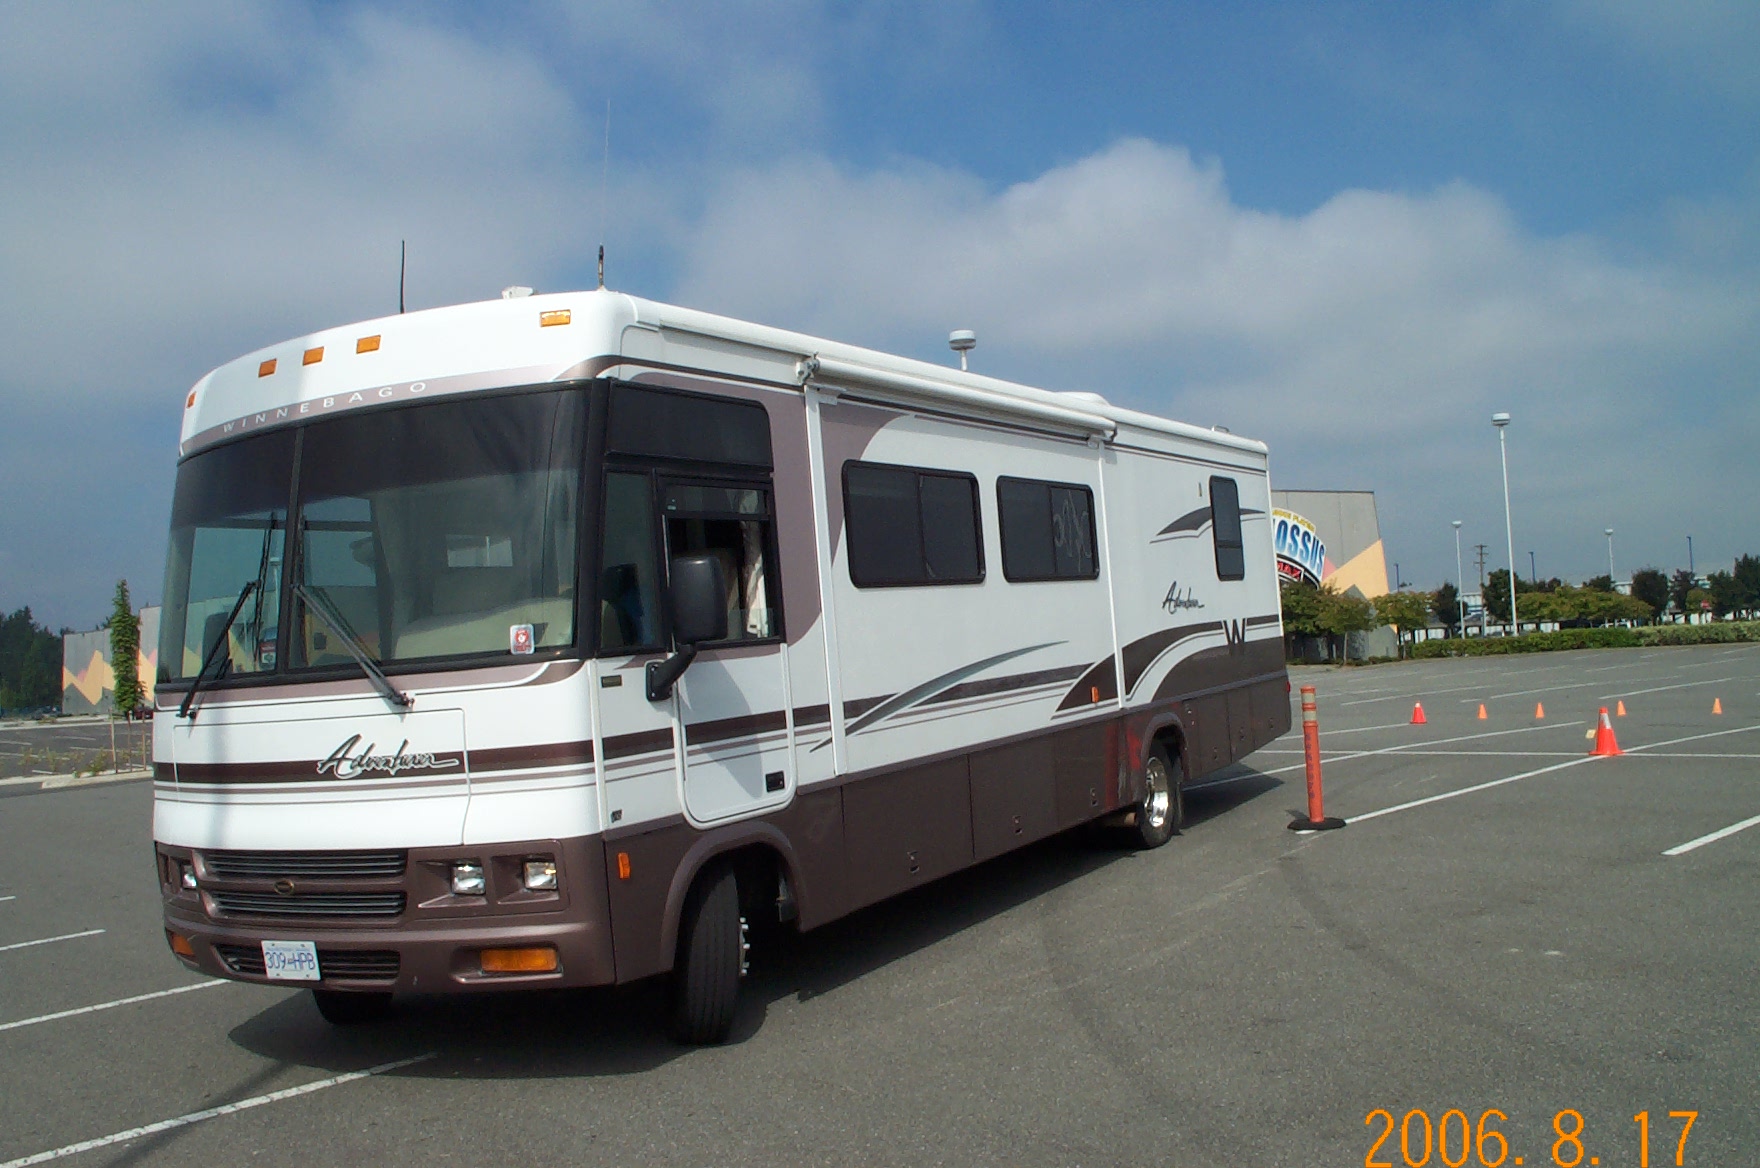 Backing up with a Class A Motorhome